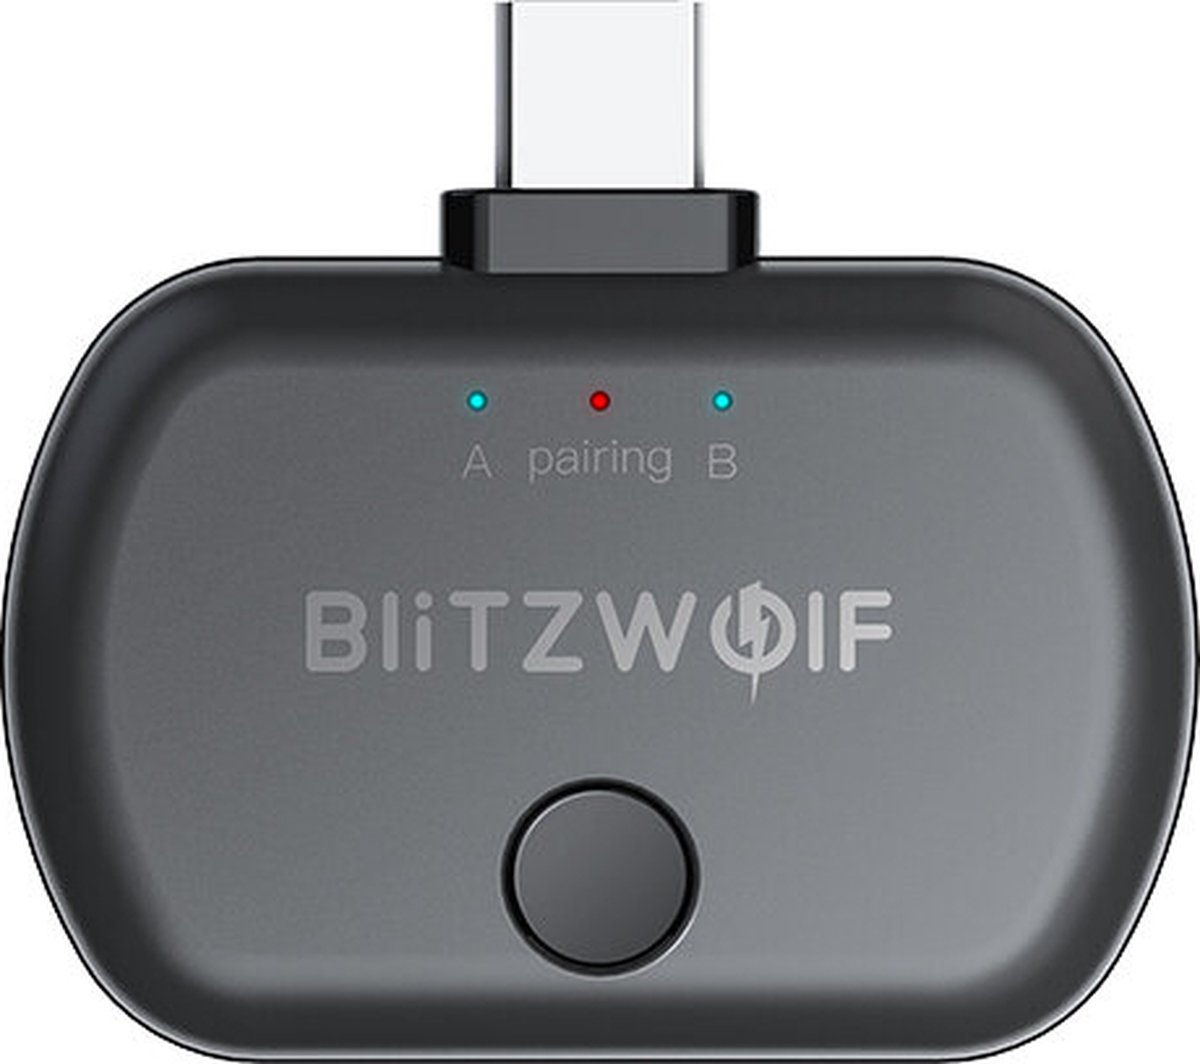 High-Quality Audio Anywhere with BW-BL1 Bluetooth V5.0 Transmitter/Receiver Adapter - Connect Your Headphones, AirPods Pro, and More